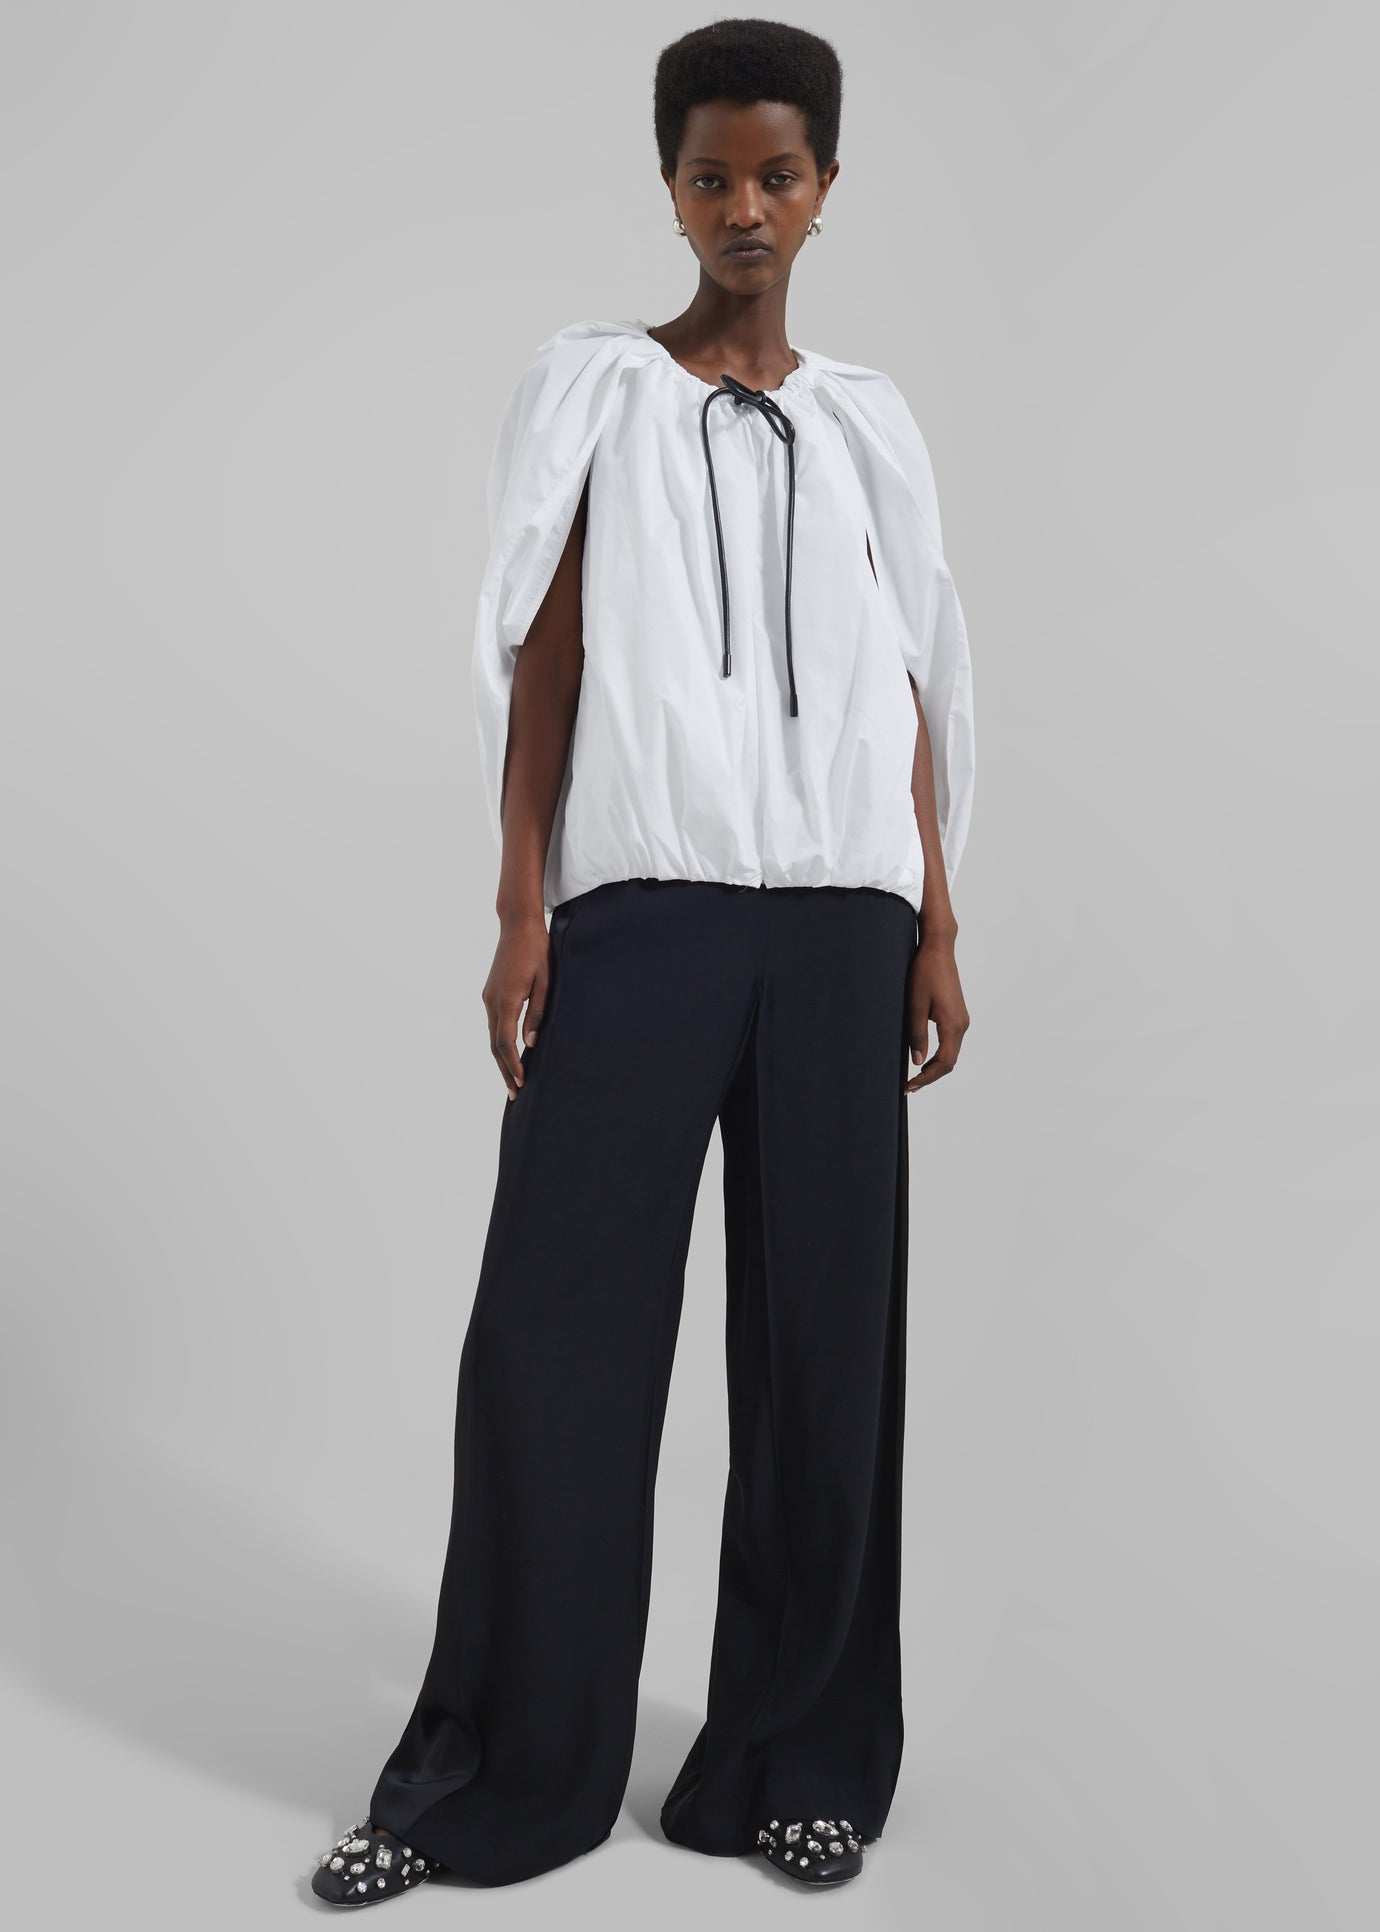 3.1 Phillip Lim Cocoon Zip Top With Cord Detail - White